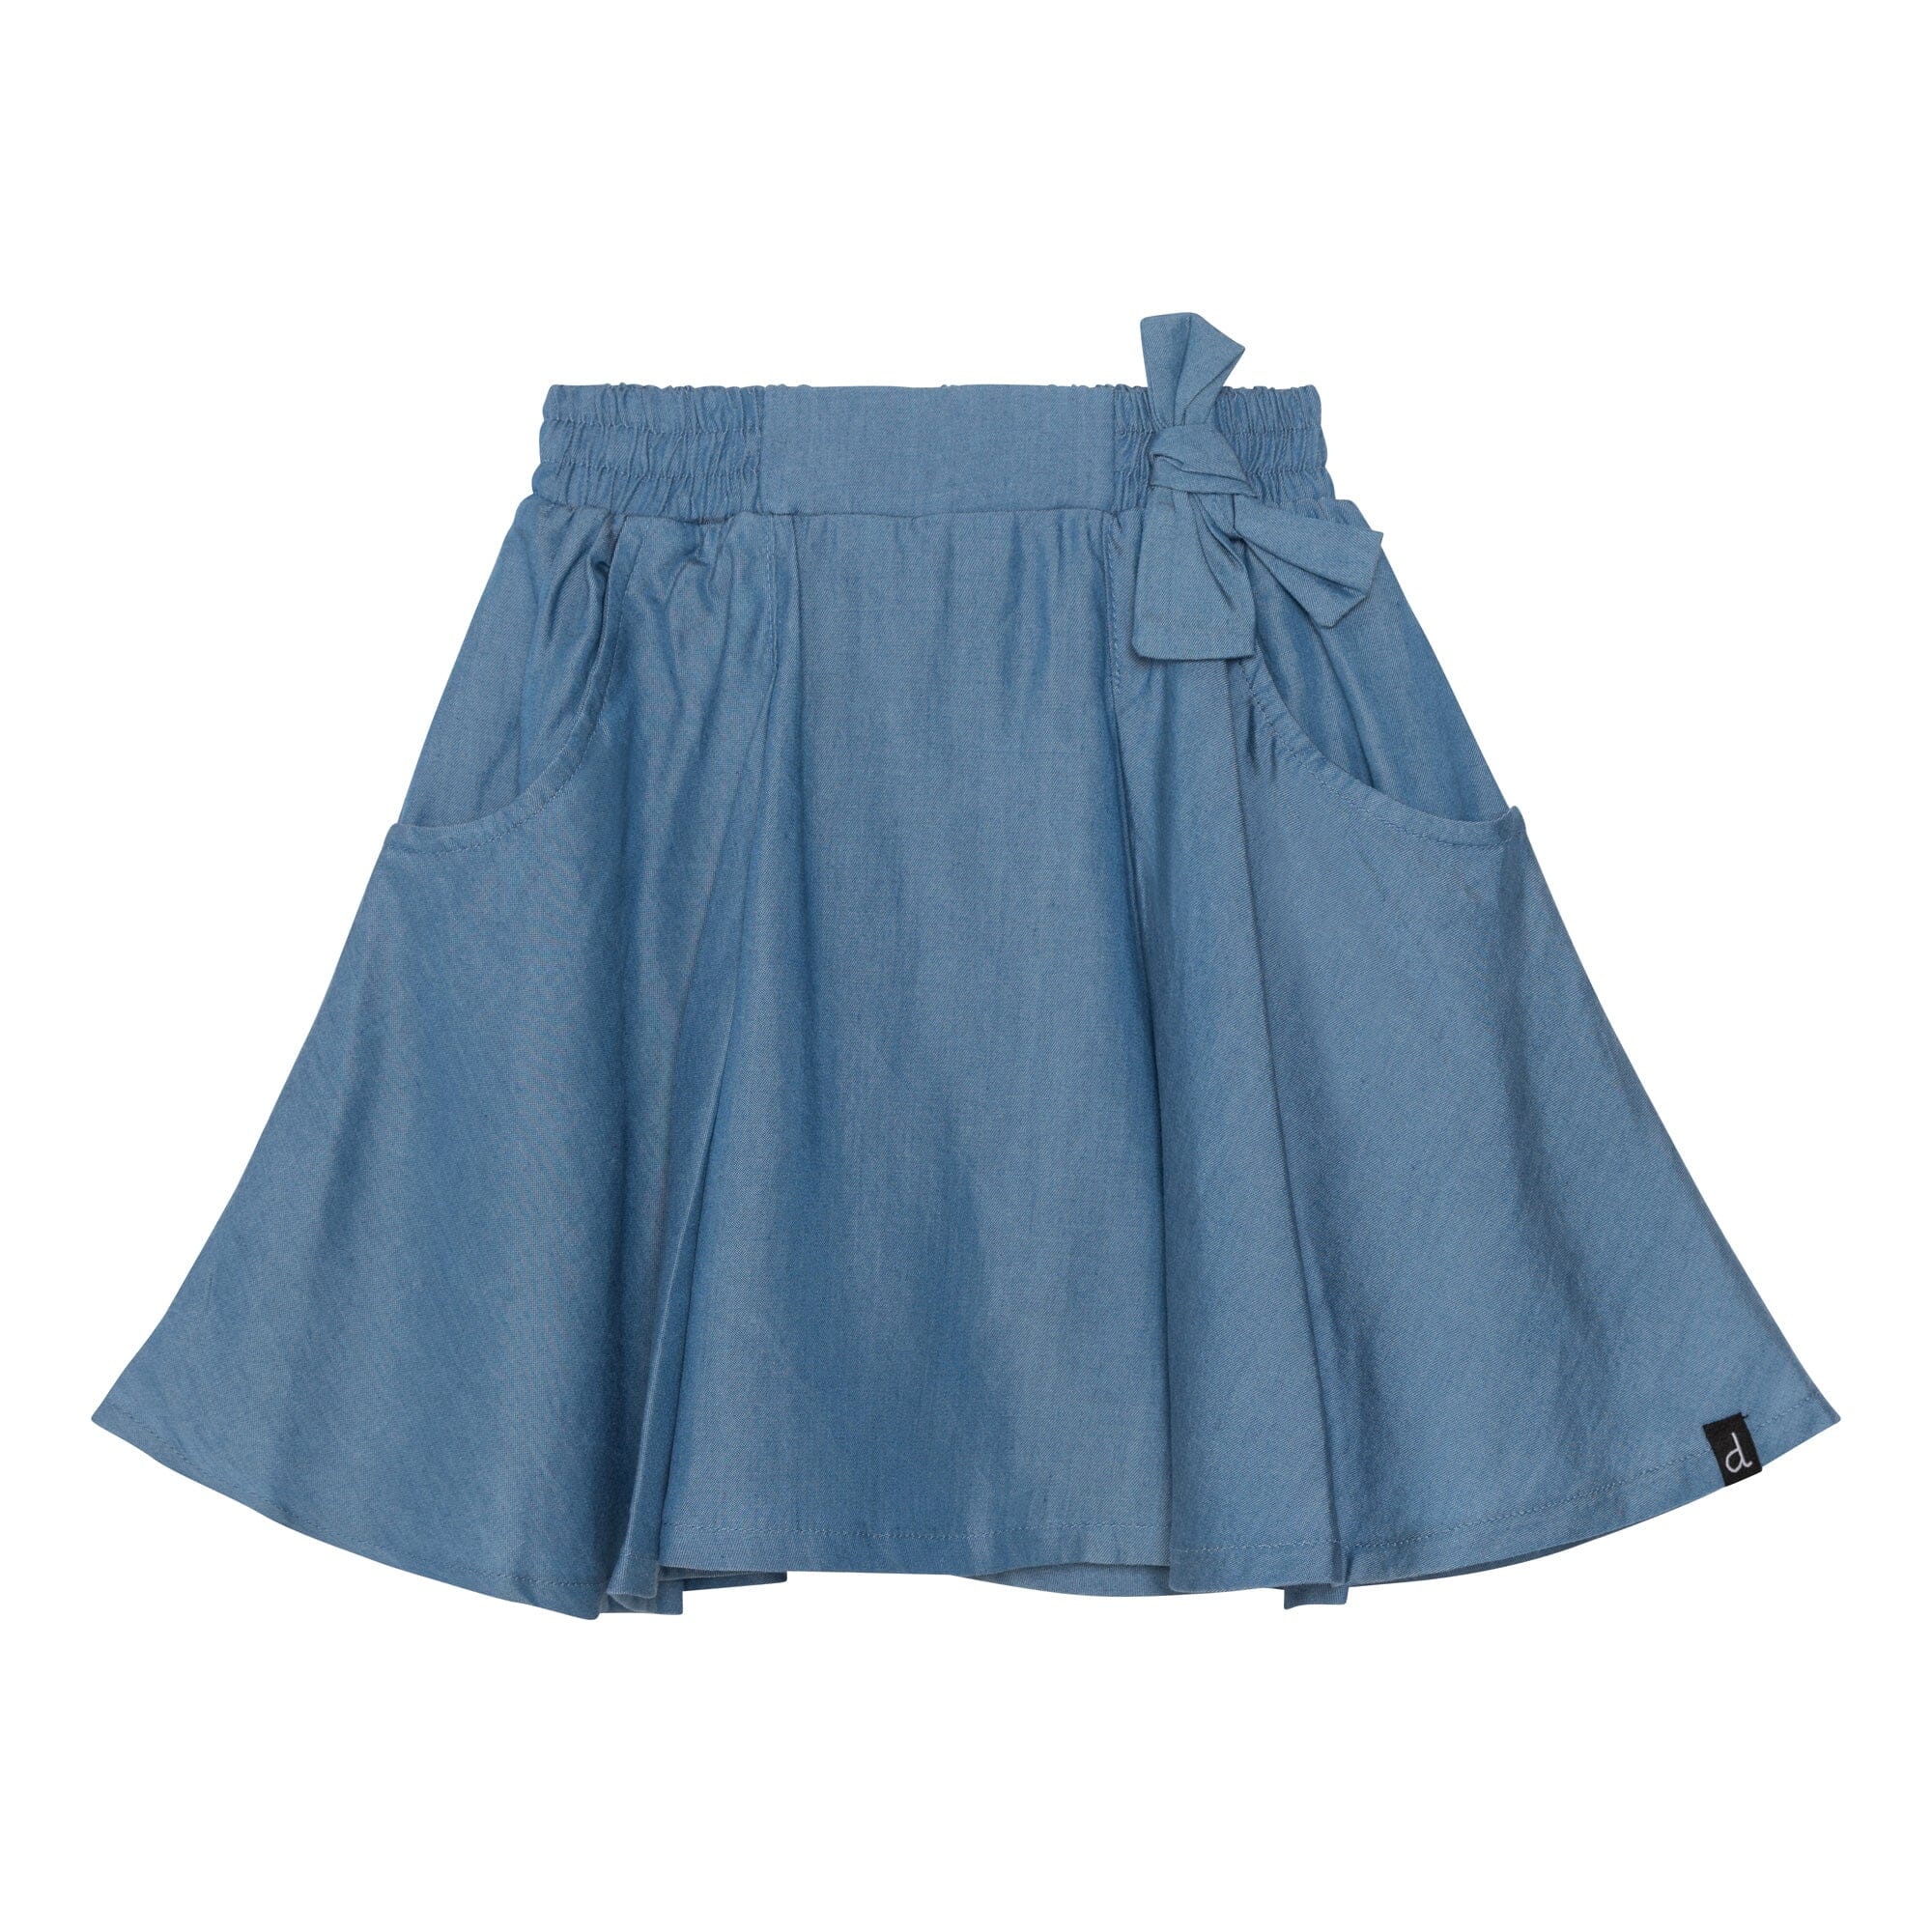 Skort With Bow Blue Chambray - E30G80_098